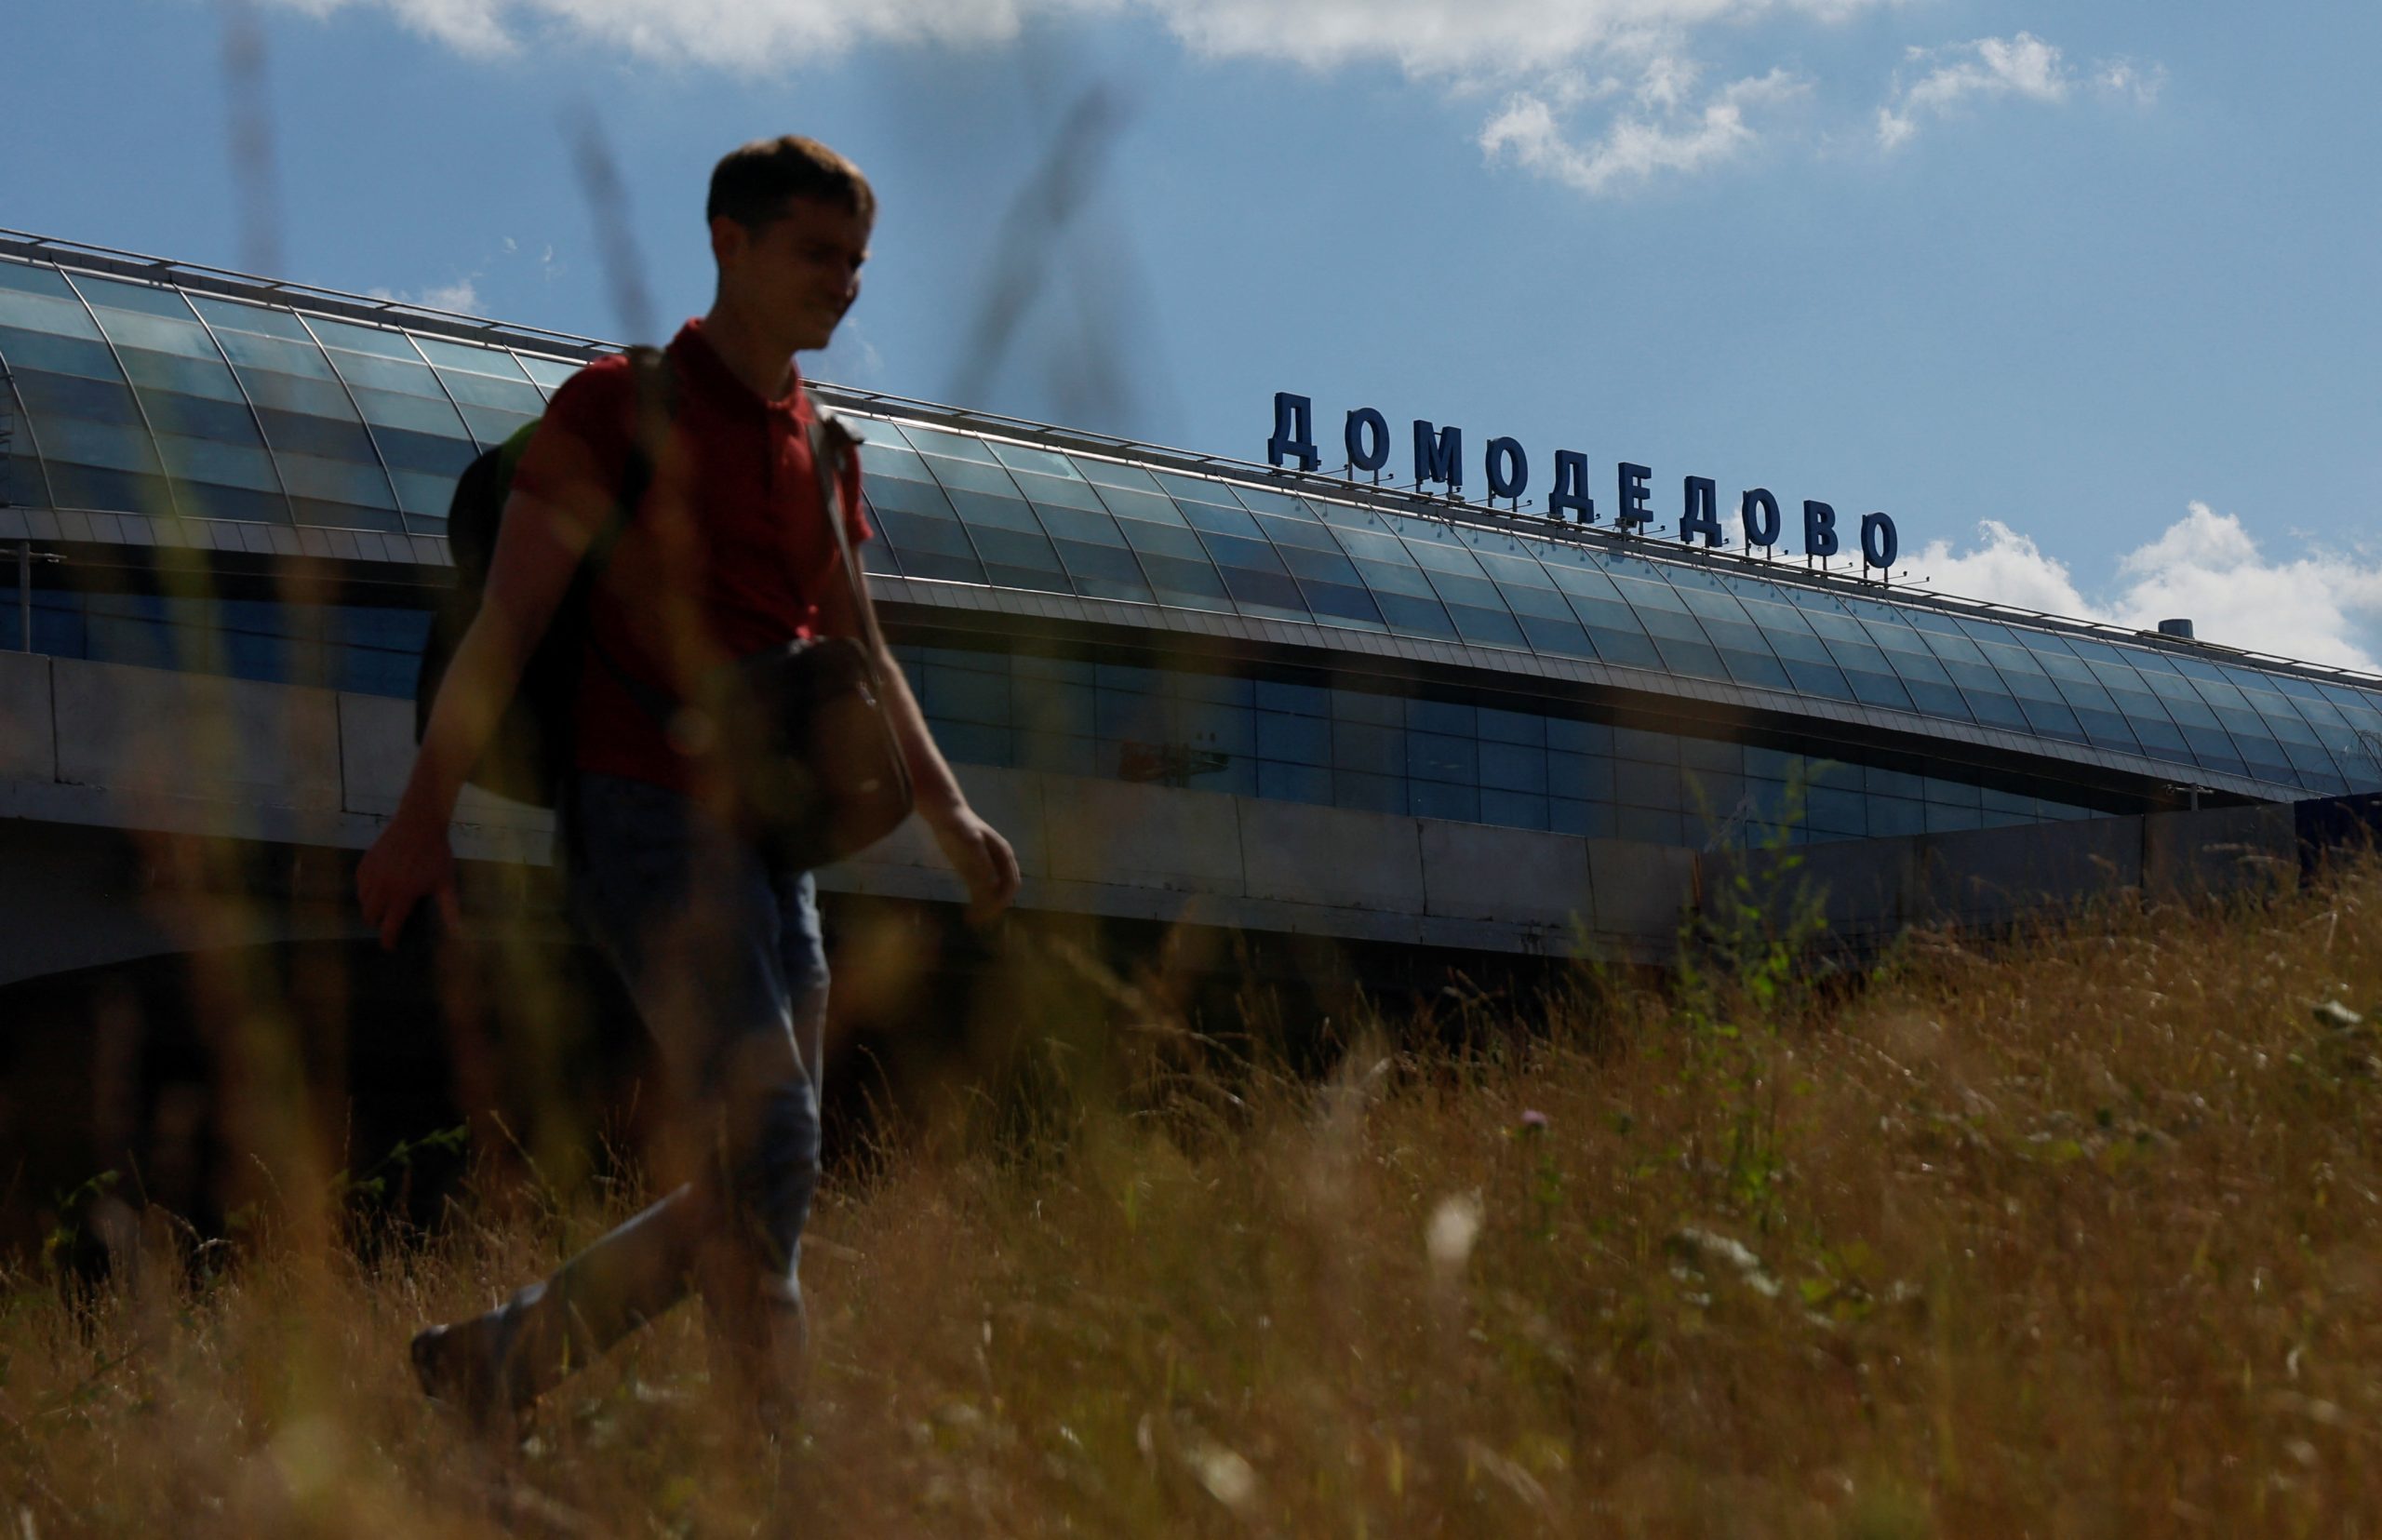 Photo: A man walks at the Domodedovo airport outside Moscow, Russia August 21, 2023. Credit: REUTERS/Maxim Shemetov.